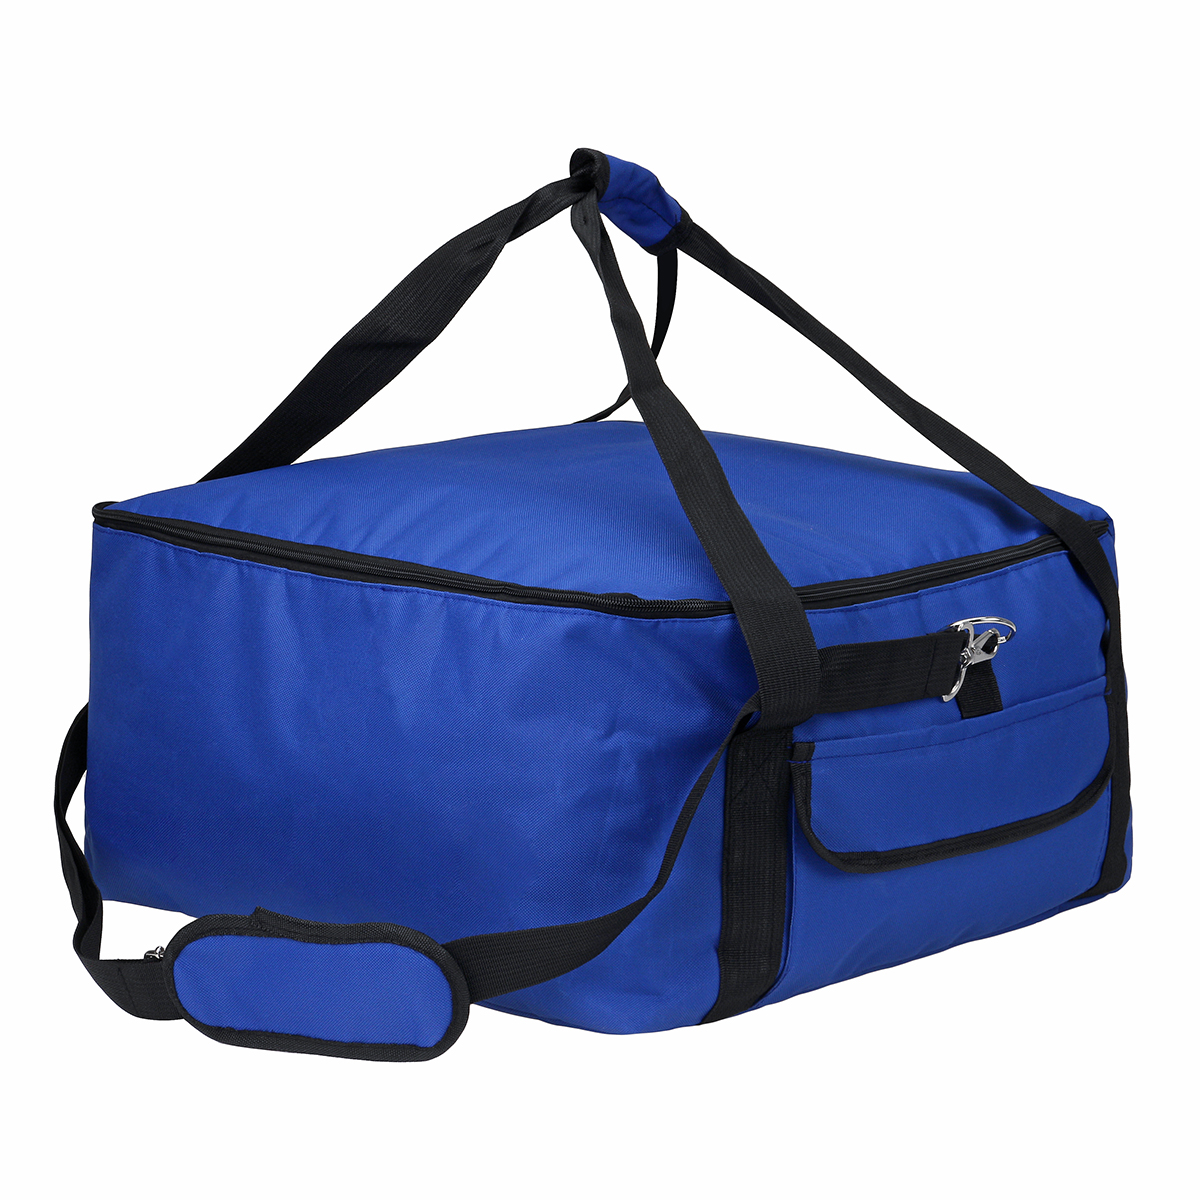 16inch-Camping-BBQ-Pizza-Delivery-Bag-Food-Insulated-Storage-Bag-Picnic-Bag-Lunch-Bag-1637130-3